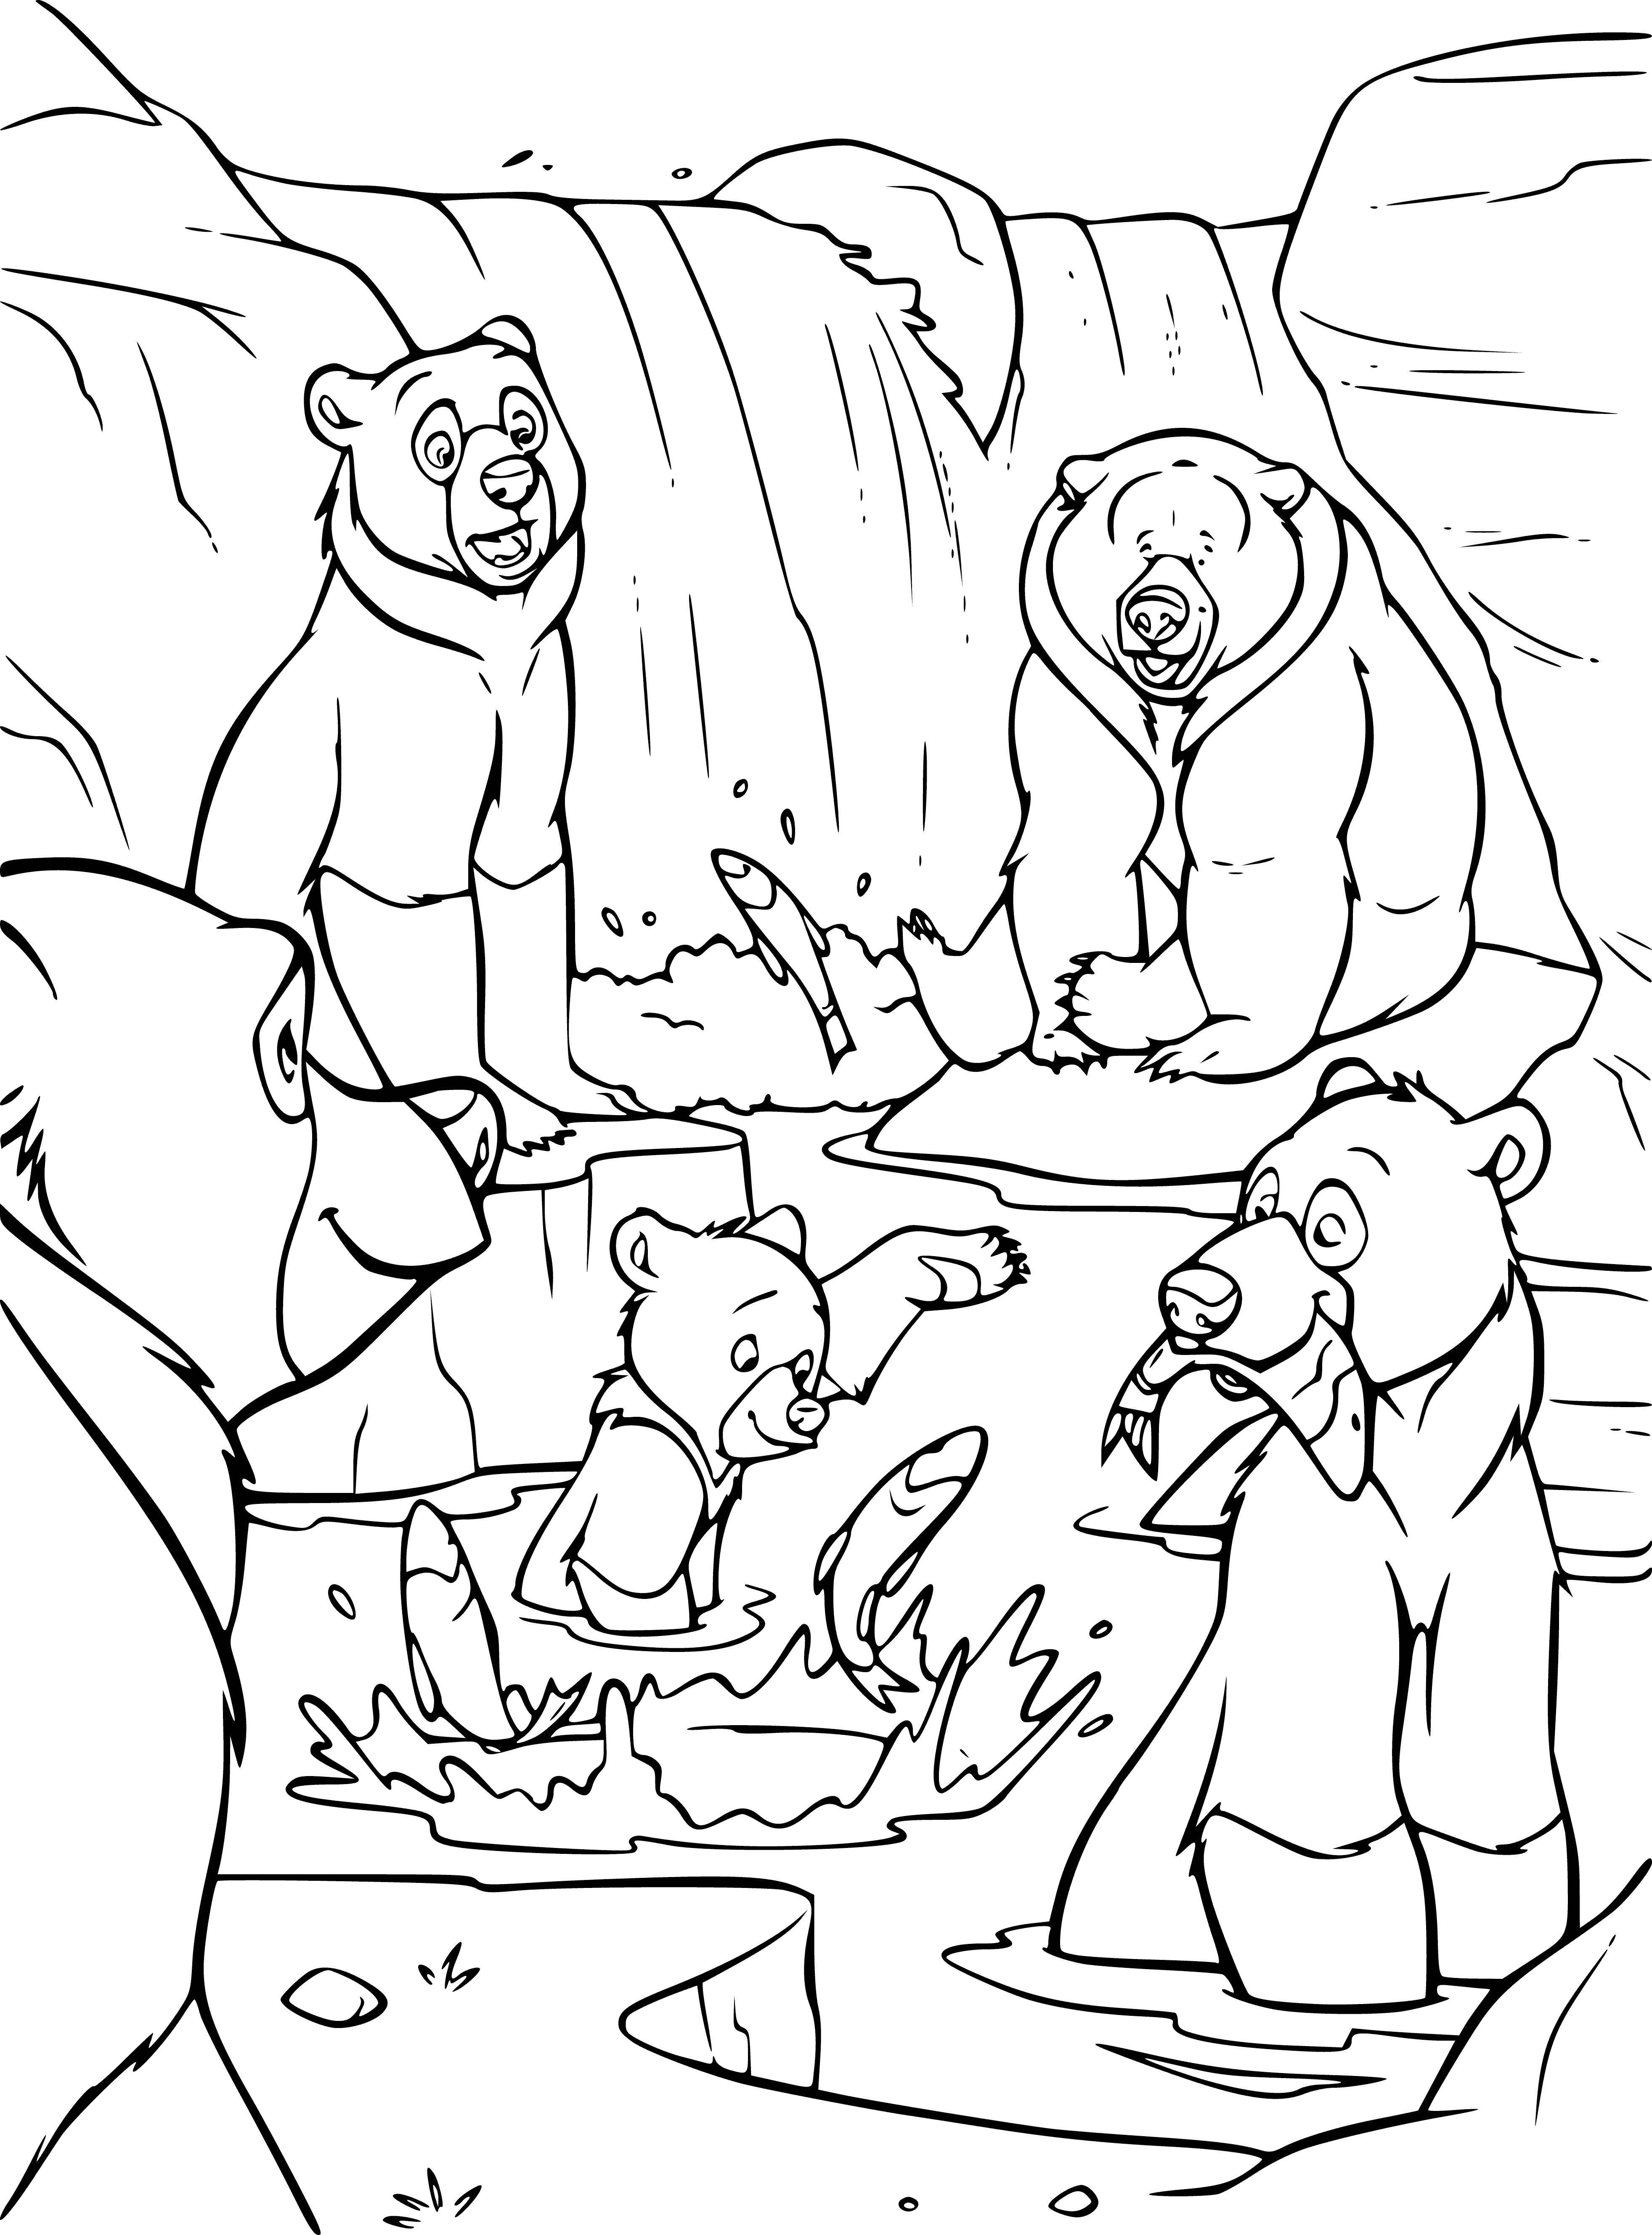 coloring page: --> Three bears at center - brown in middle, white on both sides. Brown bear wearing blue scarf, trees and blue sky in background.